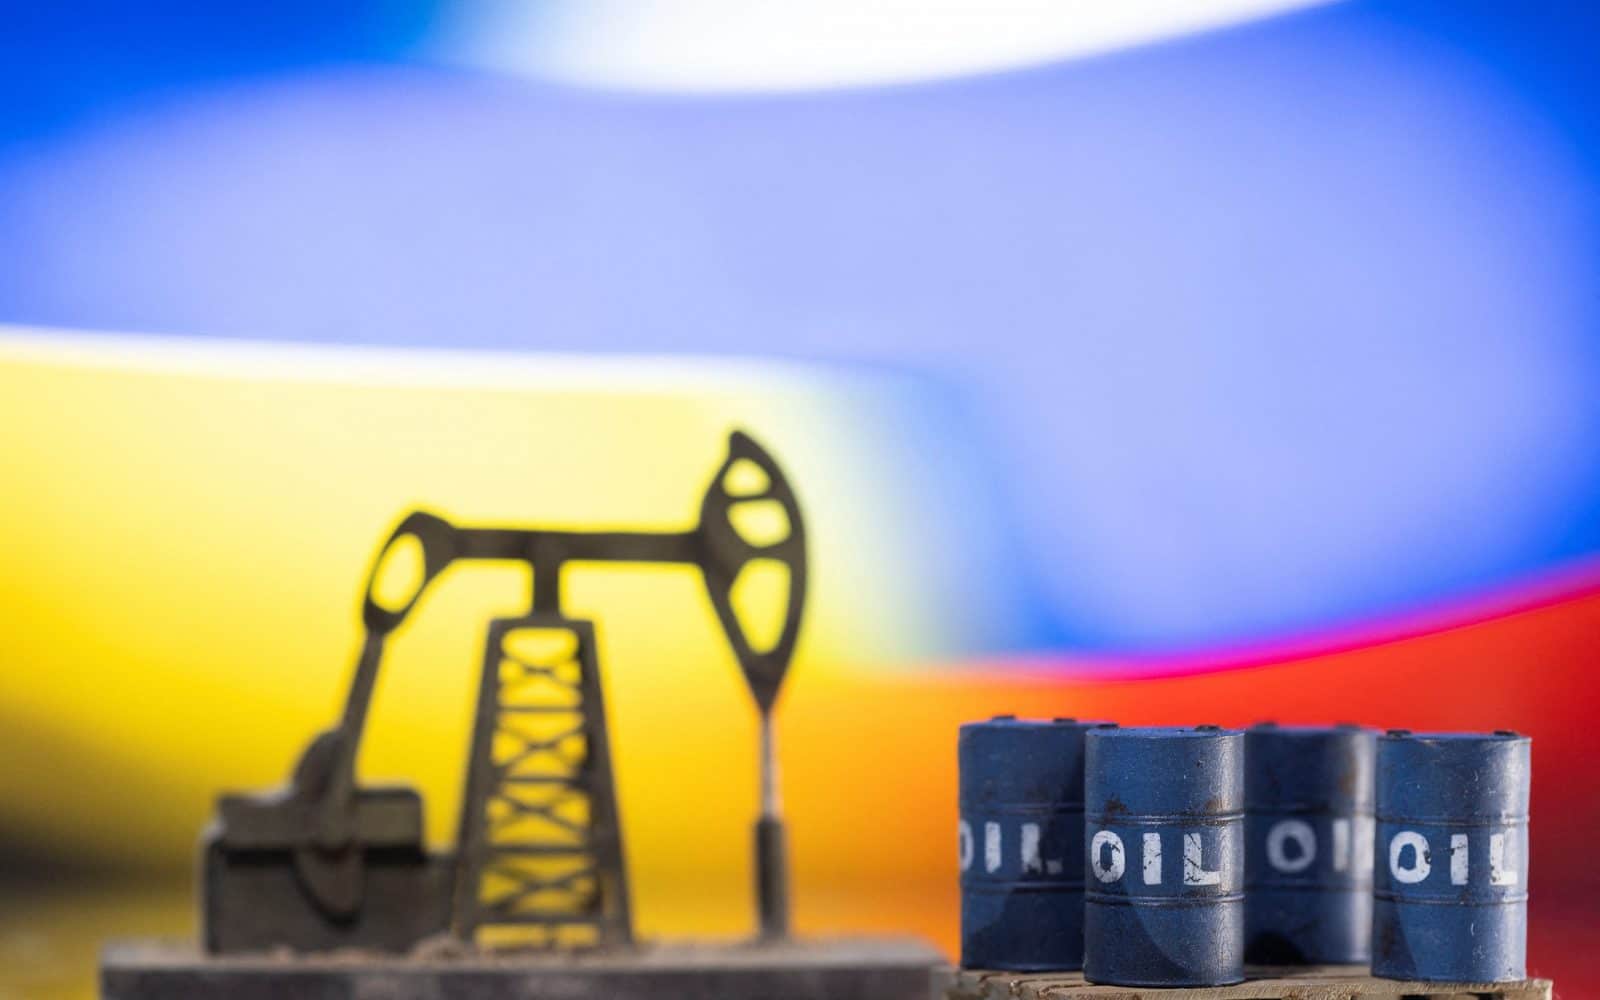 European Union stopped the supply of Russian oil by 90%, – Head of the EU Delegation to Ukraine